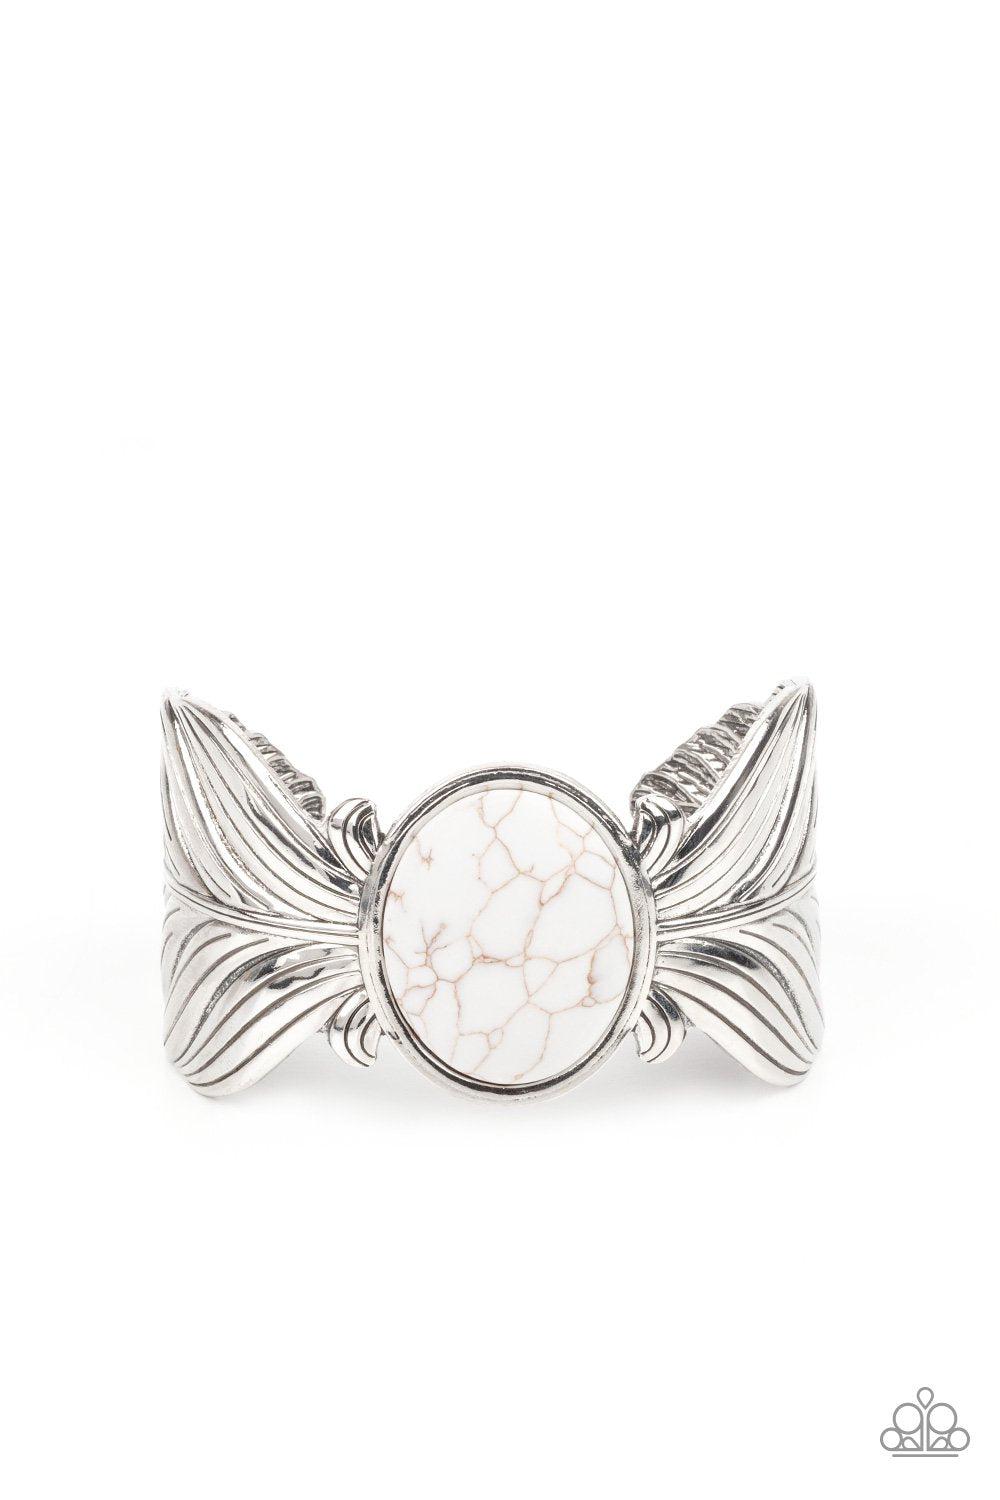 Born to Soar White Stone and Silver Feather Cuff Bracelet - Paparazzi Accessories- lightbox - CarasShop.com - $5 Jewelry by Cara Jewels